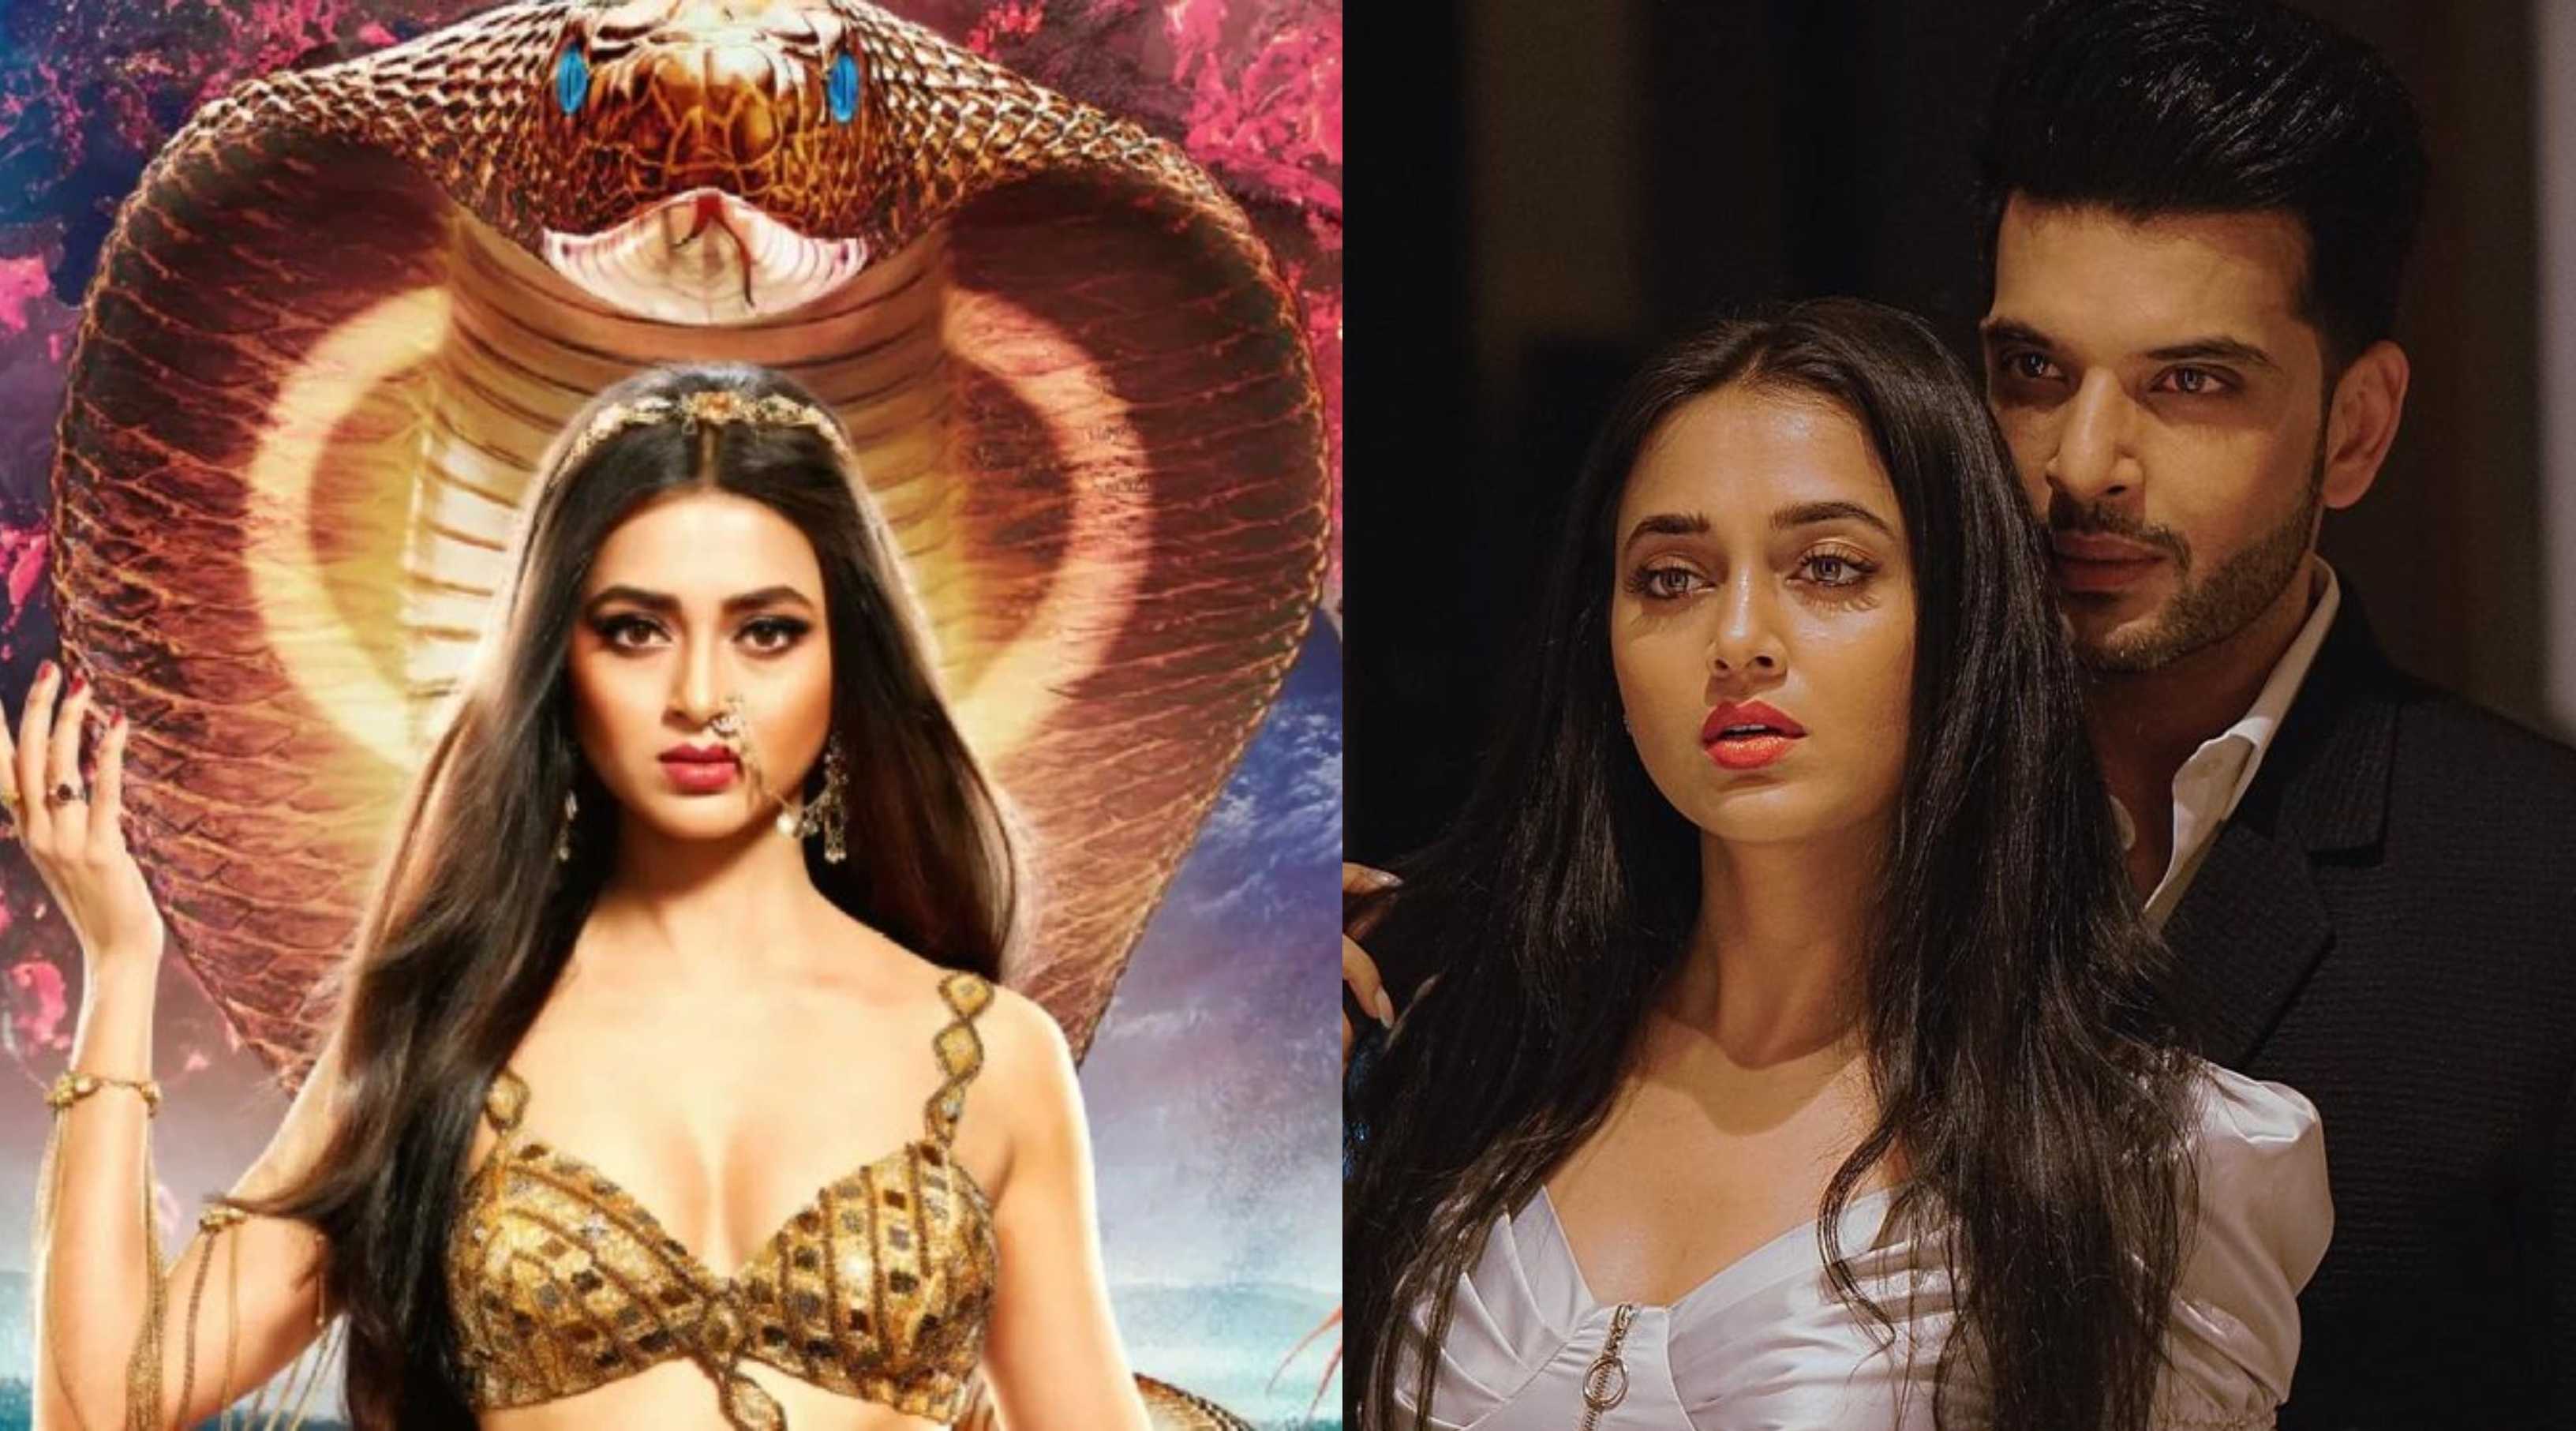 Naagin 6: Tejasswi Prakash’s BF Karan Kundrra to play her on-screen love interest in new track? Here’s what we know